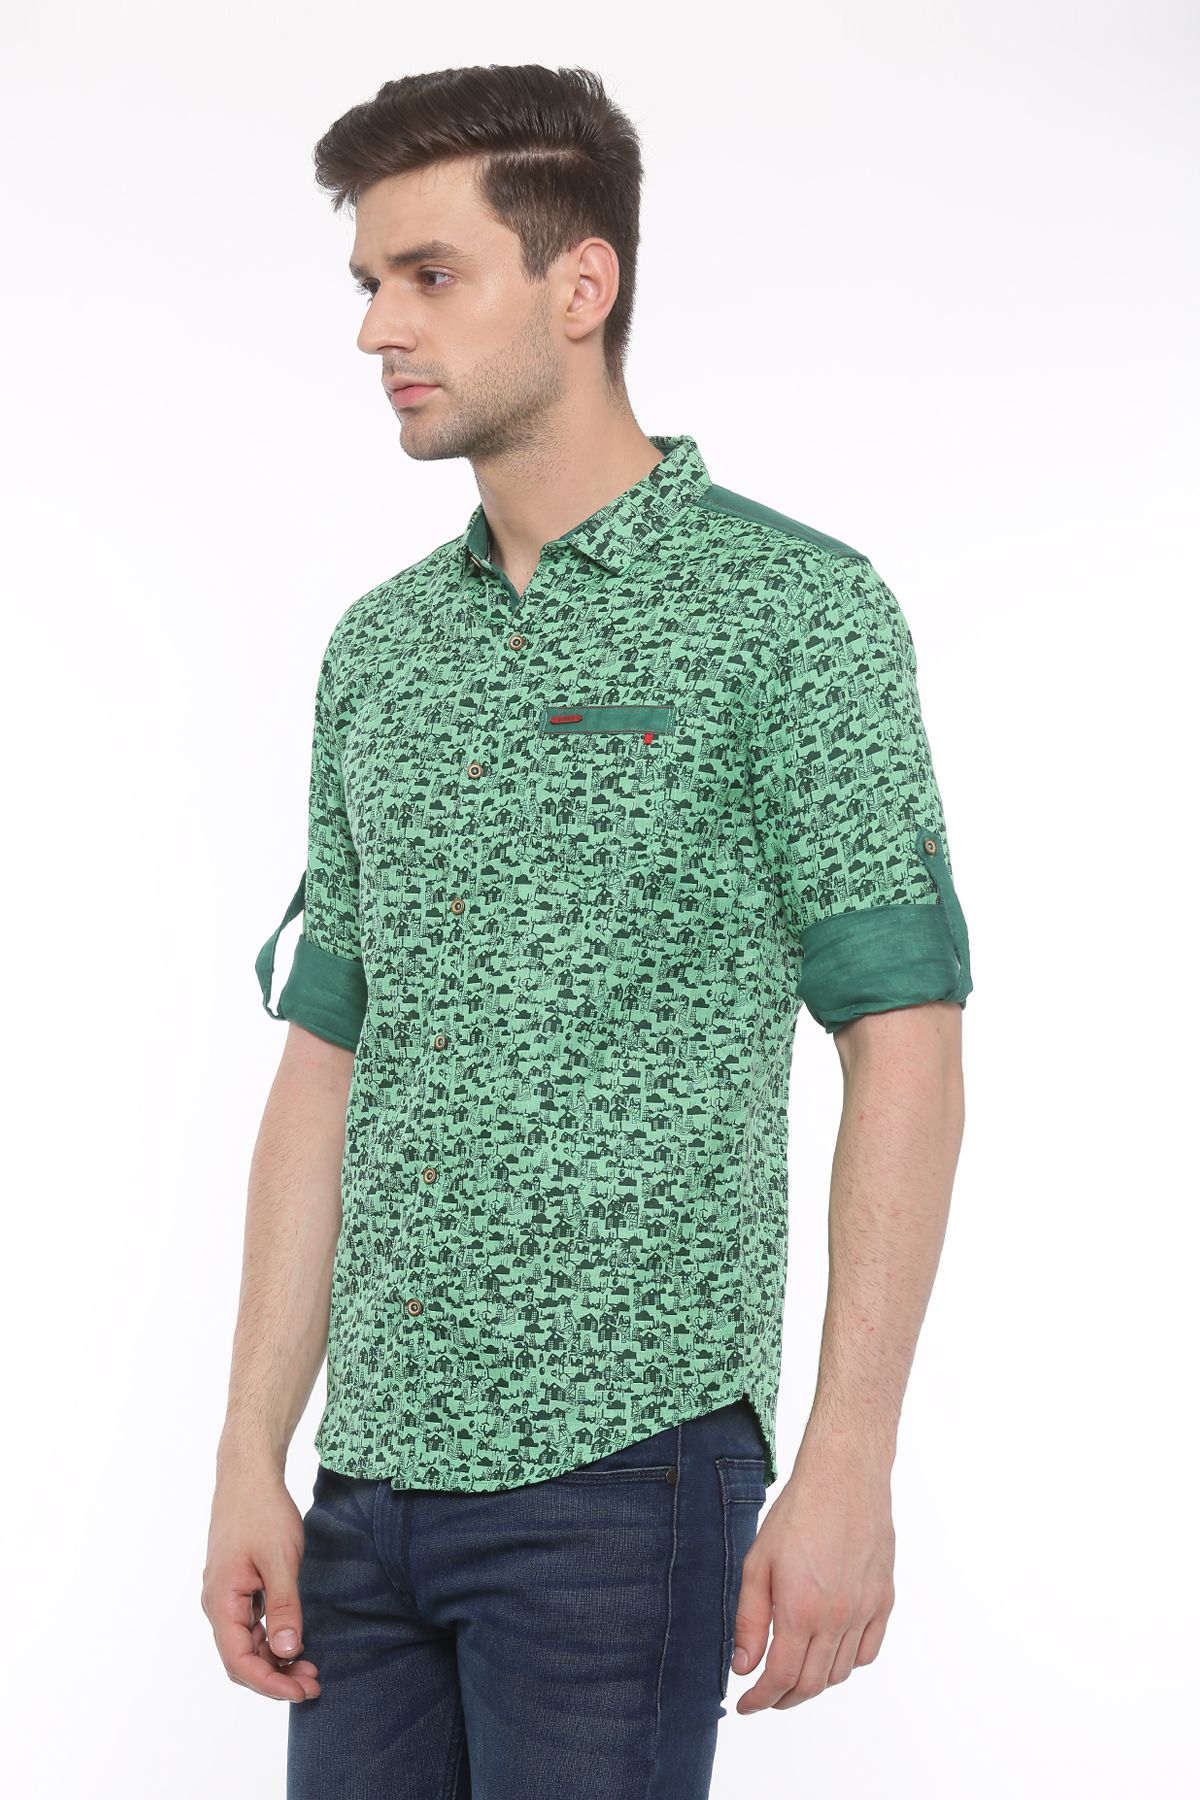 WITH Green Casual Slim Fit Shirt - Buy WITH Green Casual Slim Fit Shirt ...